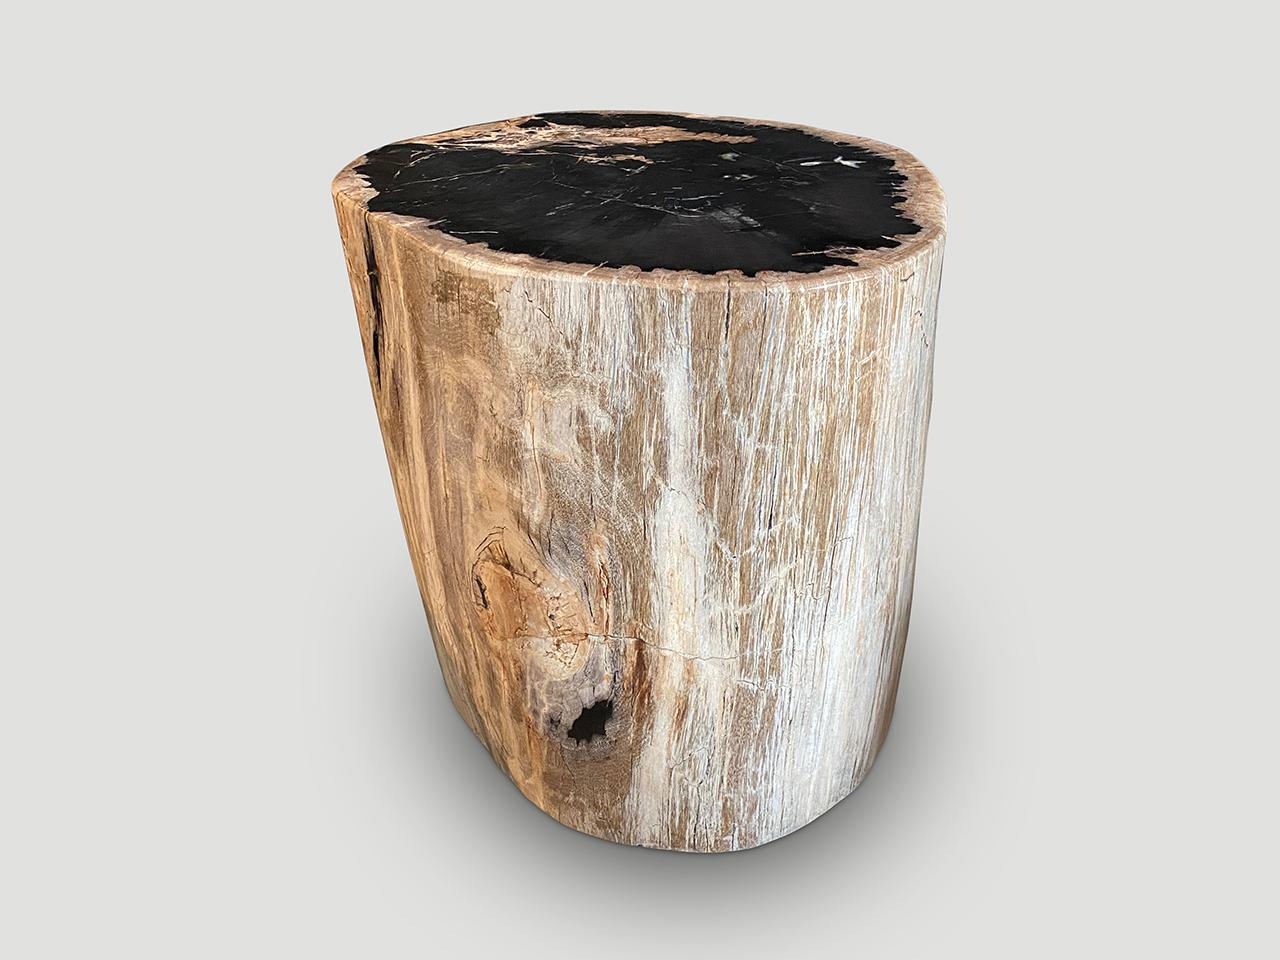 Beautiful tones and markings on this large impressive high quality petrified wood side table. It’s fascinating how Mother Nature produces these exquisite 40 million year old petrified teak logs with such contrasting colors and natural patterns